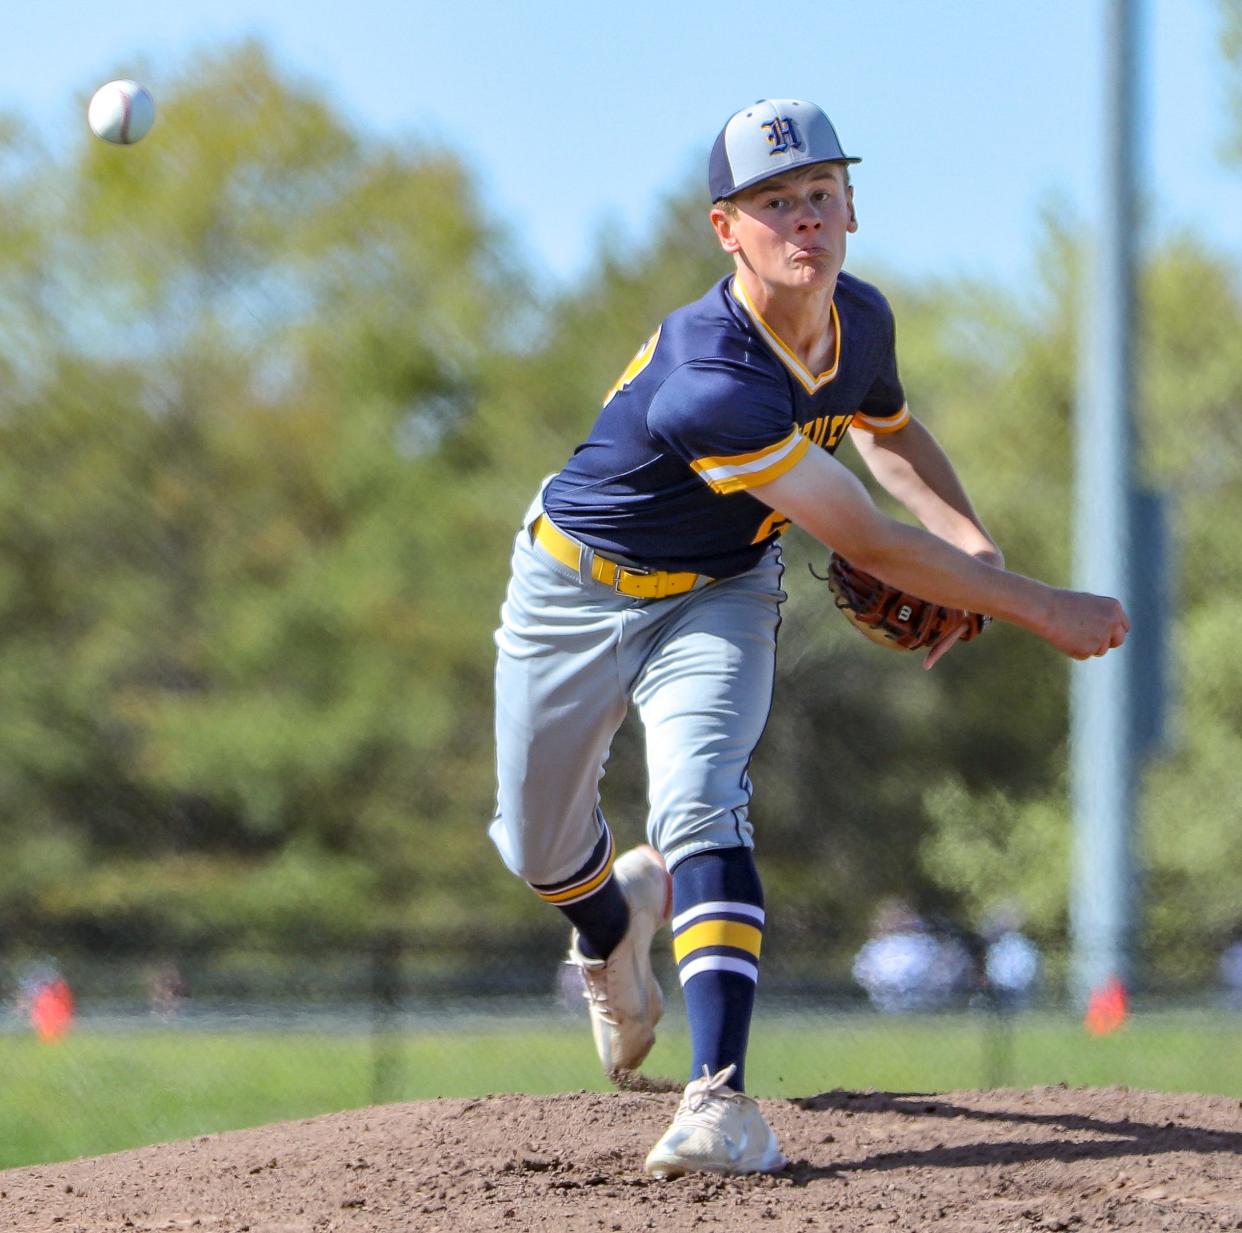 Hanover's Gabe Knudsen pitches during a game against Plymouth South on Wednesday, May 18, 2022.